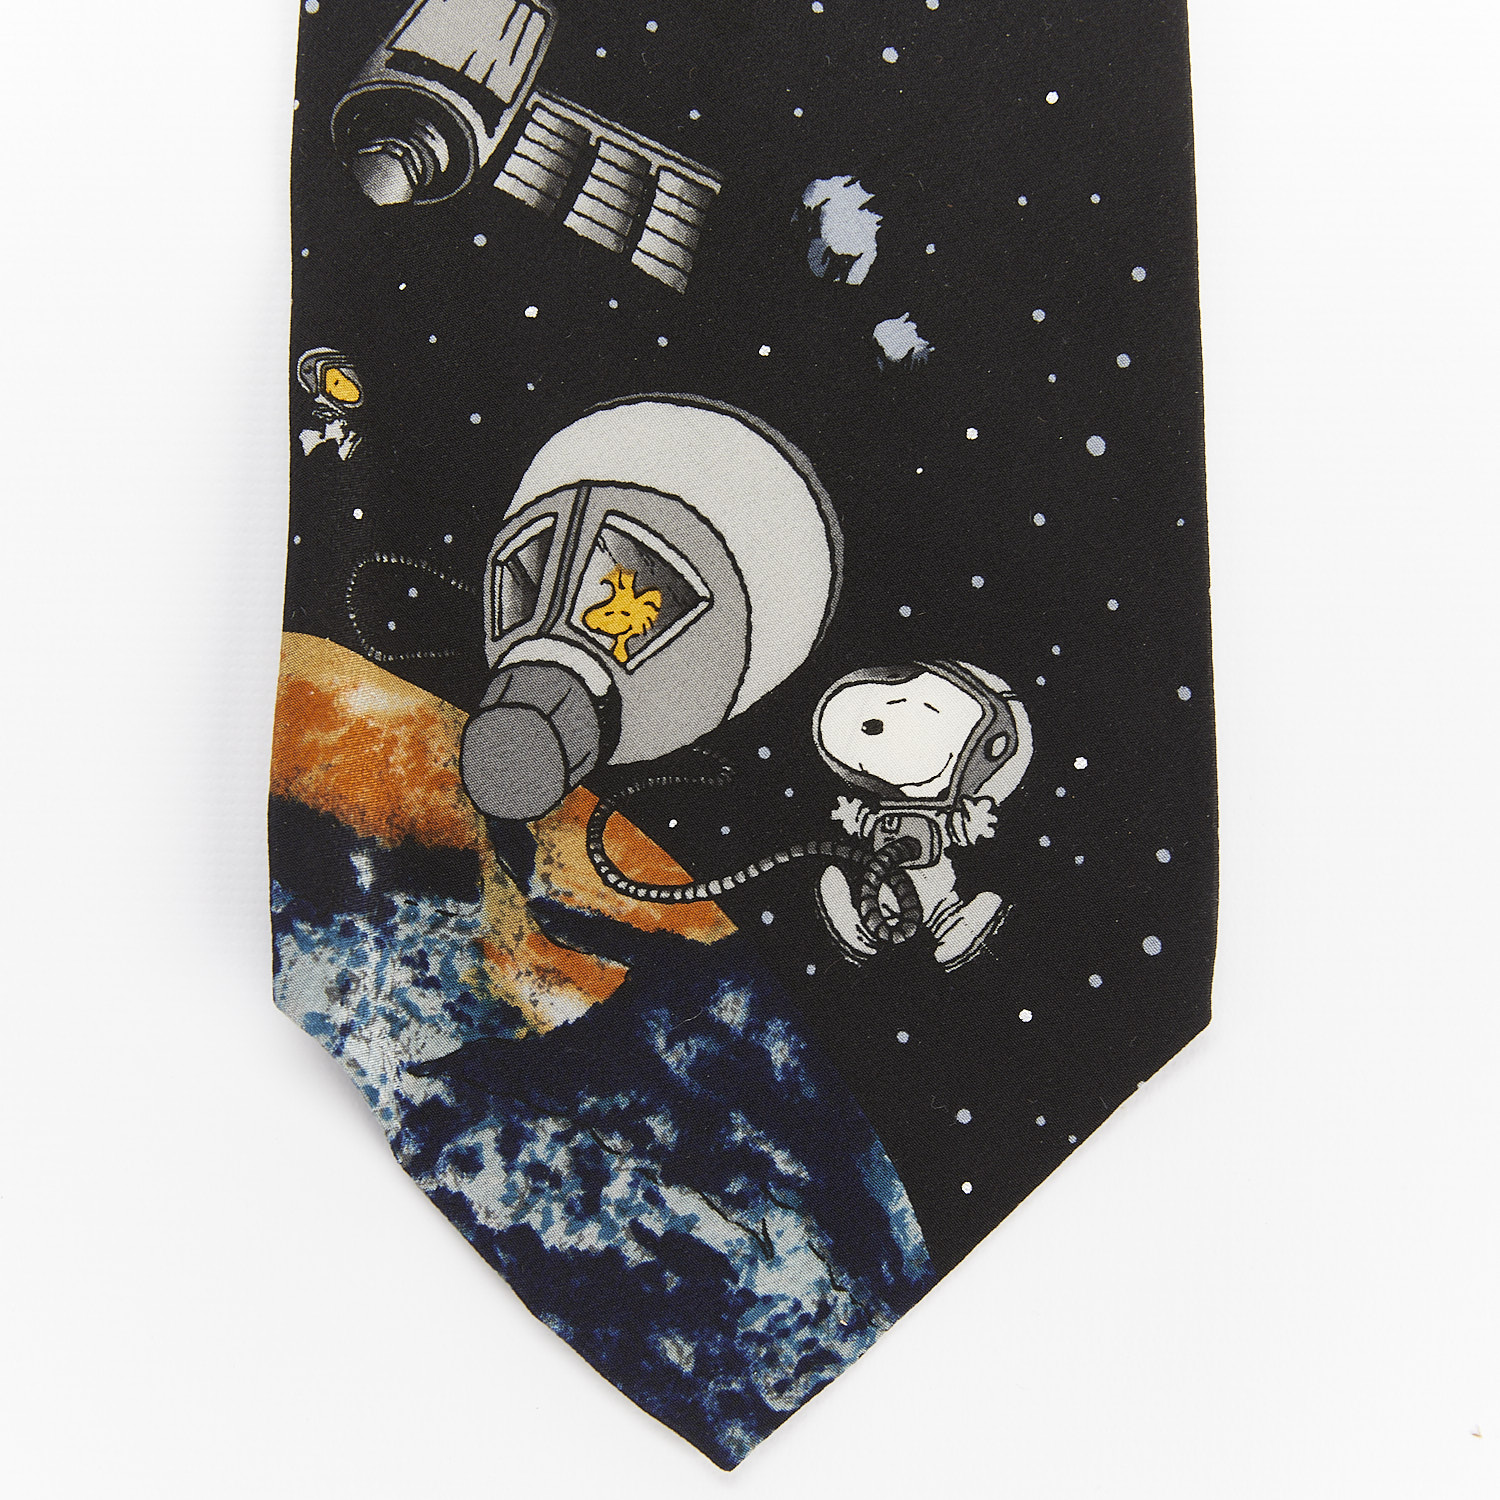 3 Ties of Snoopy - Striped & Space Themed - Image 5 of 10